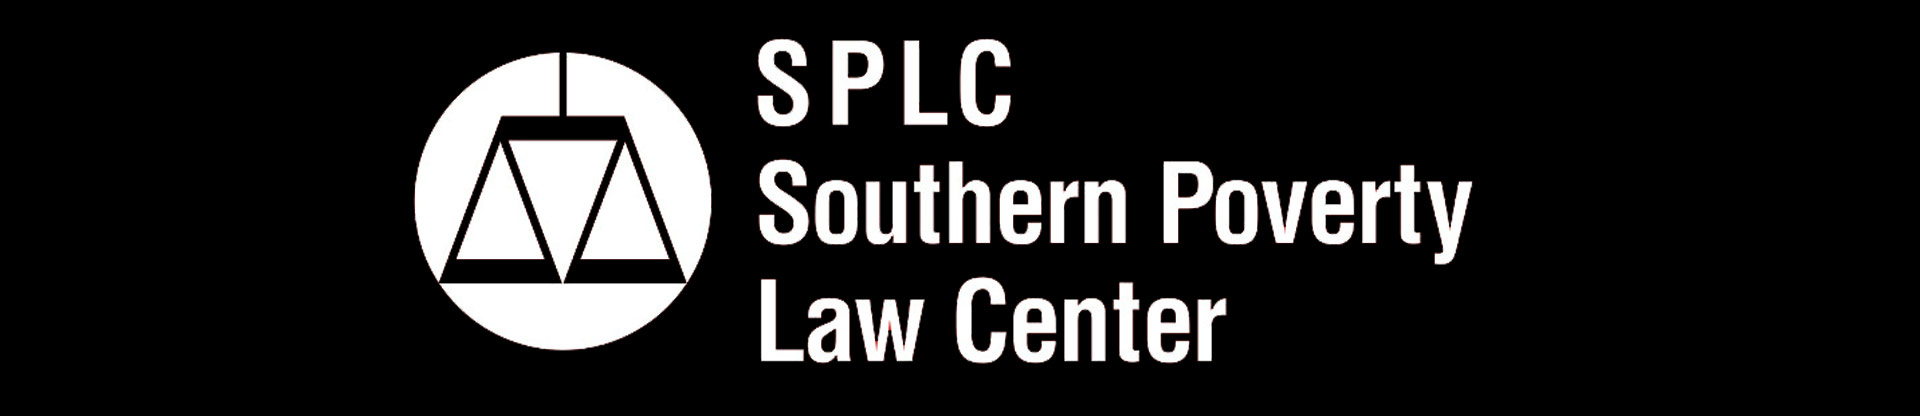 Image for Southern Poverty Law Center